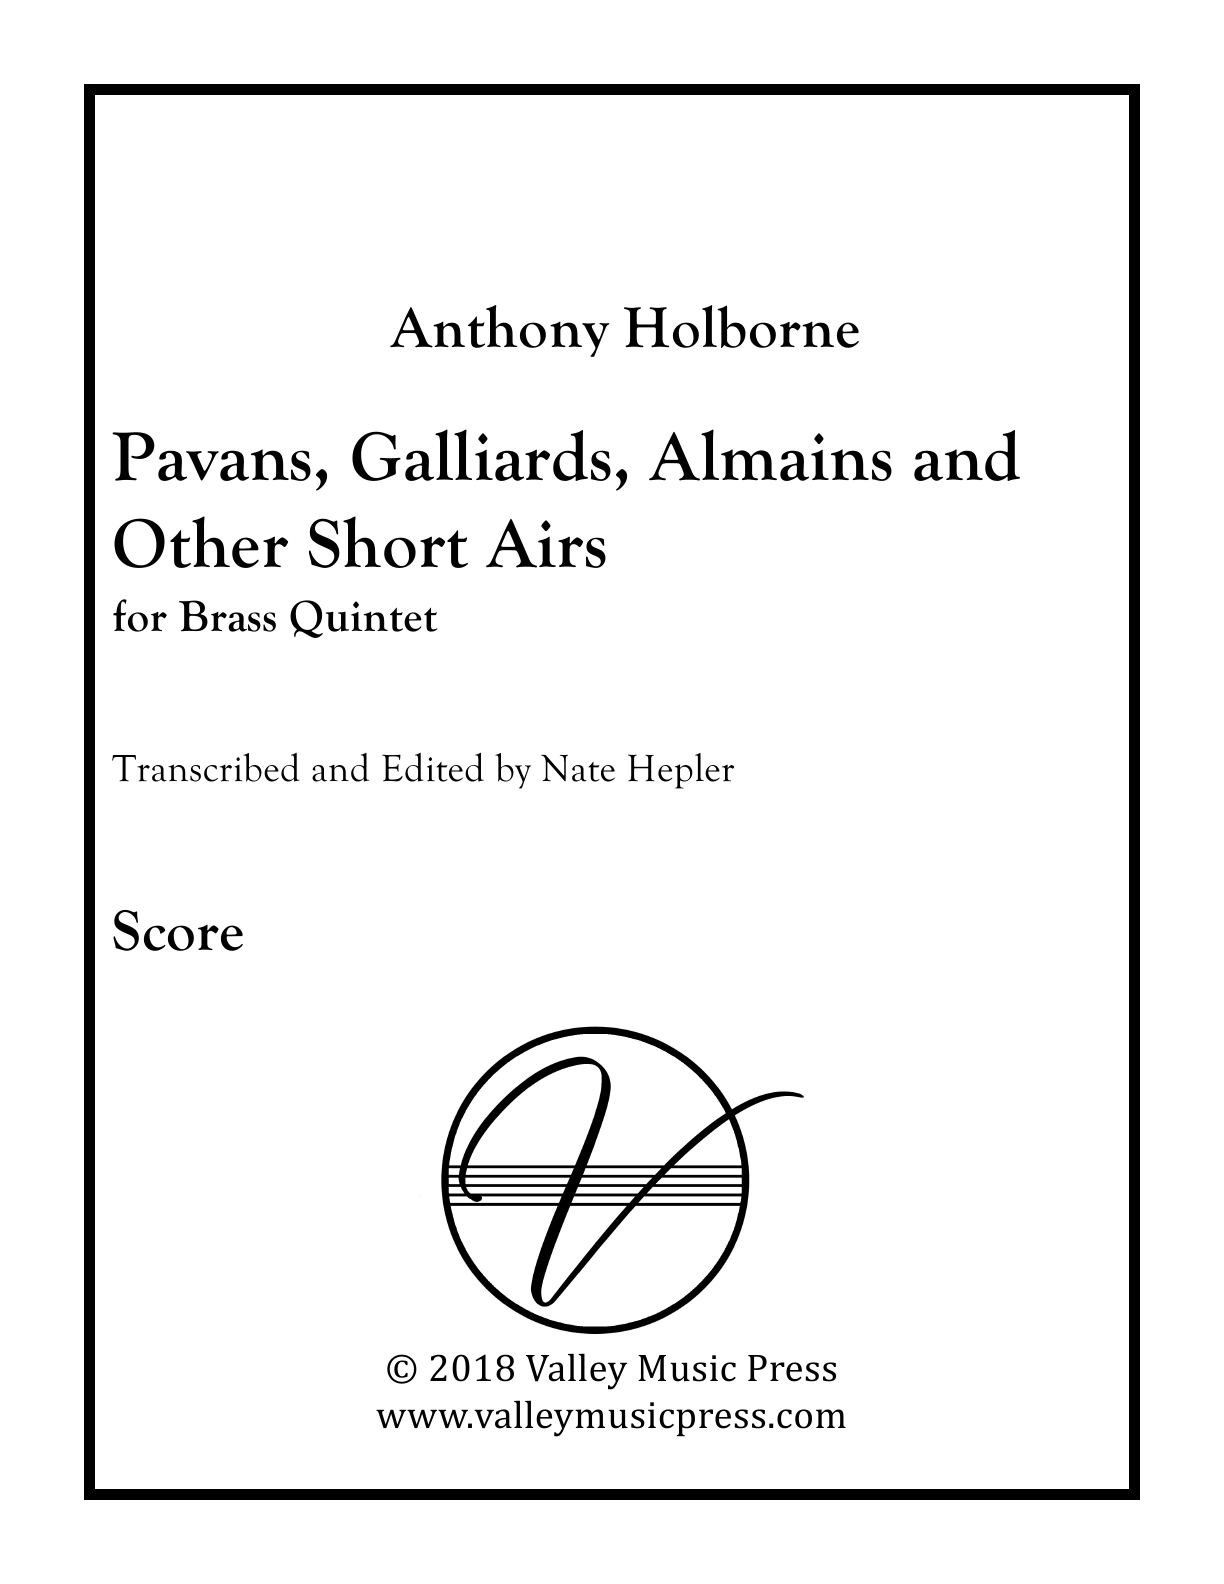 Holborne - Pavans, Galliards, Almains and Short Airs (All) (BQ) - Click Image to Close